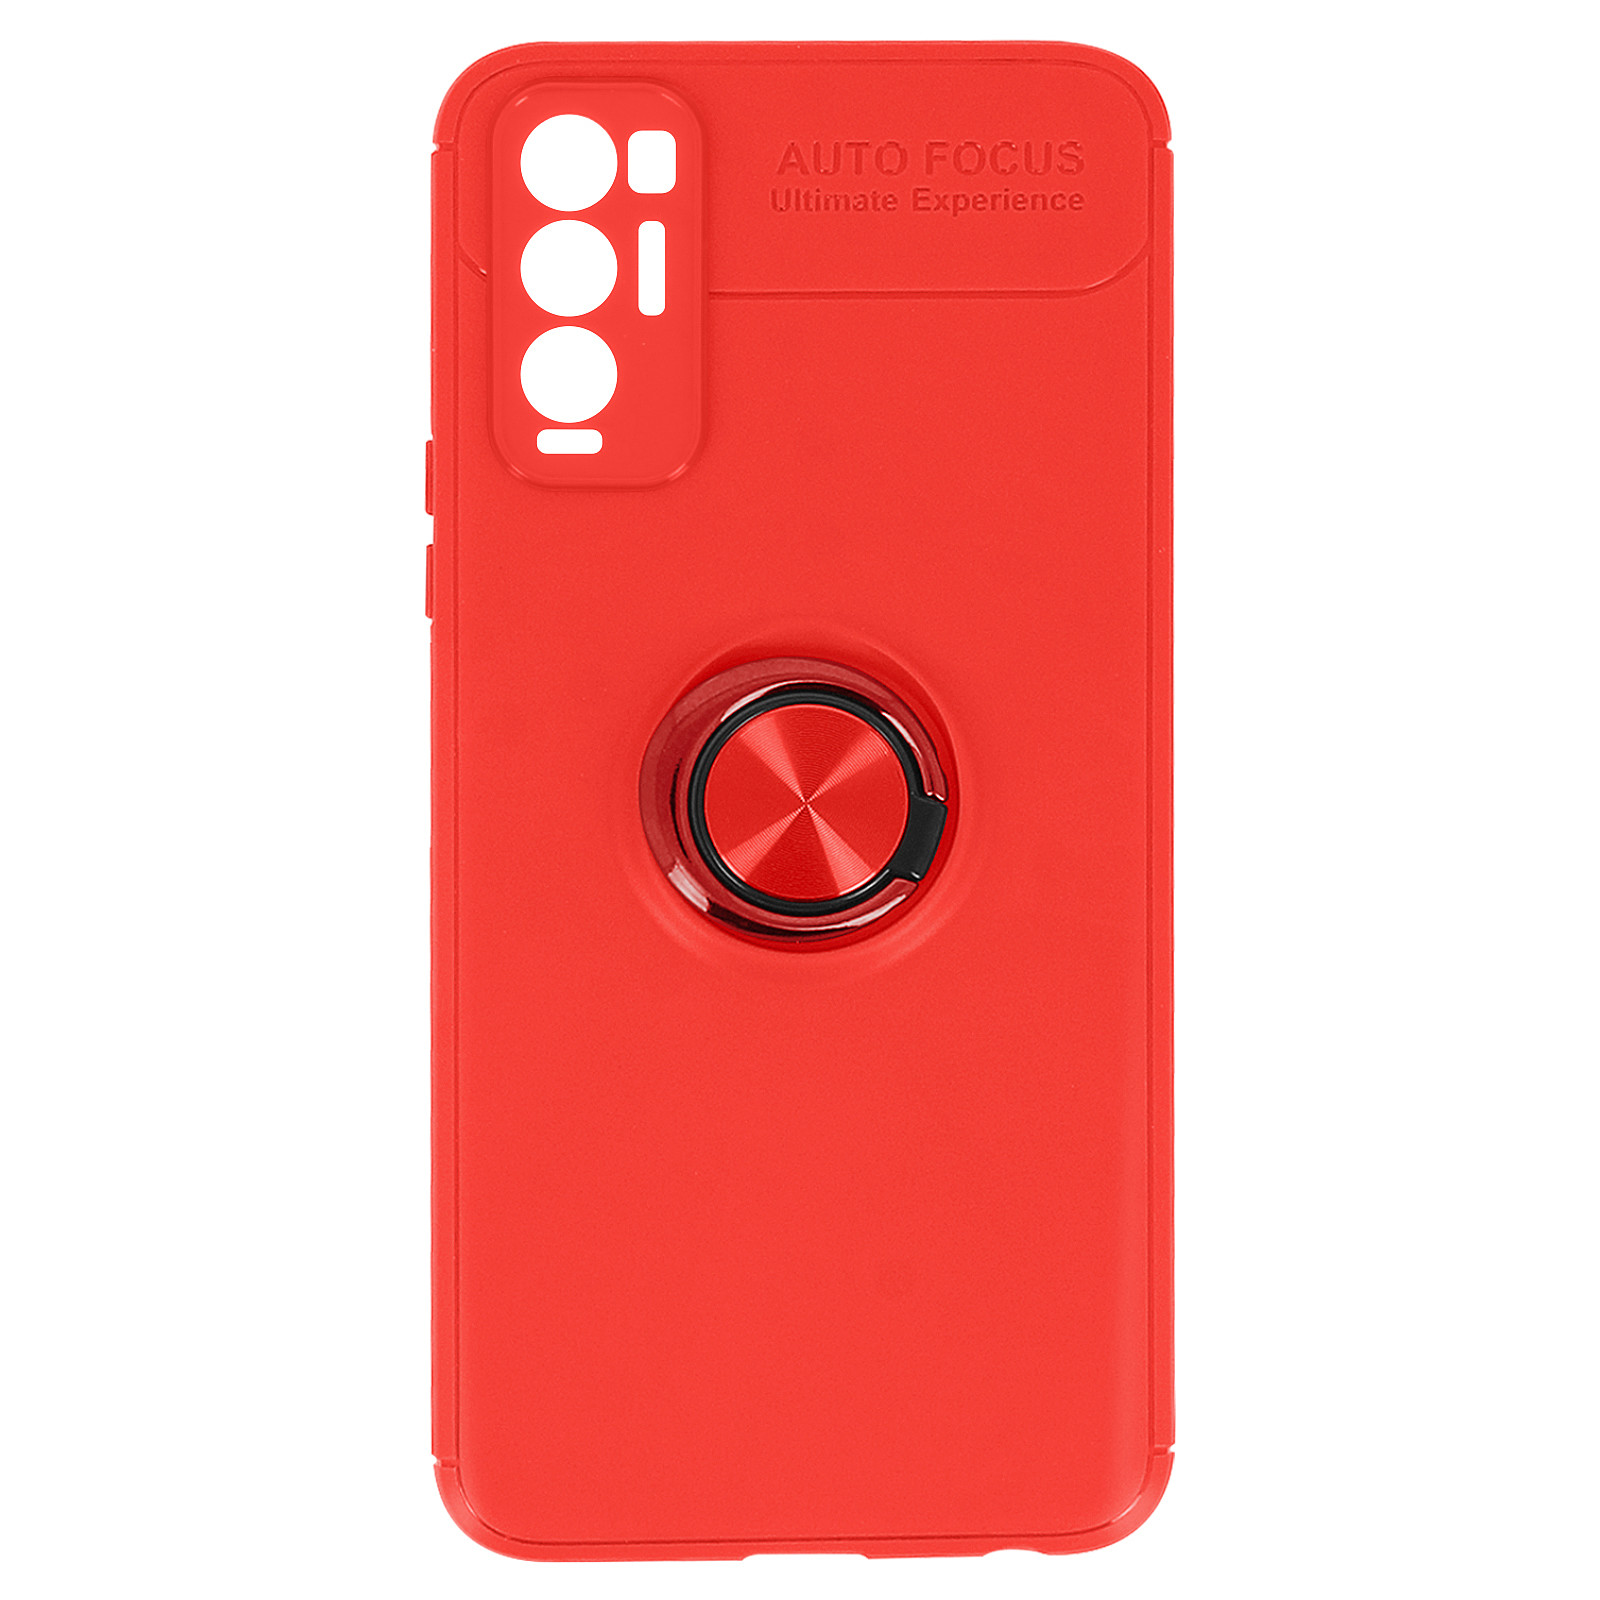 Avizar Coque pour Oppo Find X3 Neo Bague Support Metallique Silicone Gel Rouge - Coque telephone Avizar